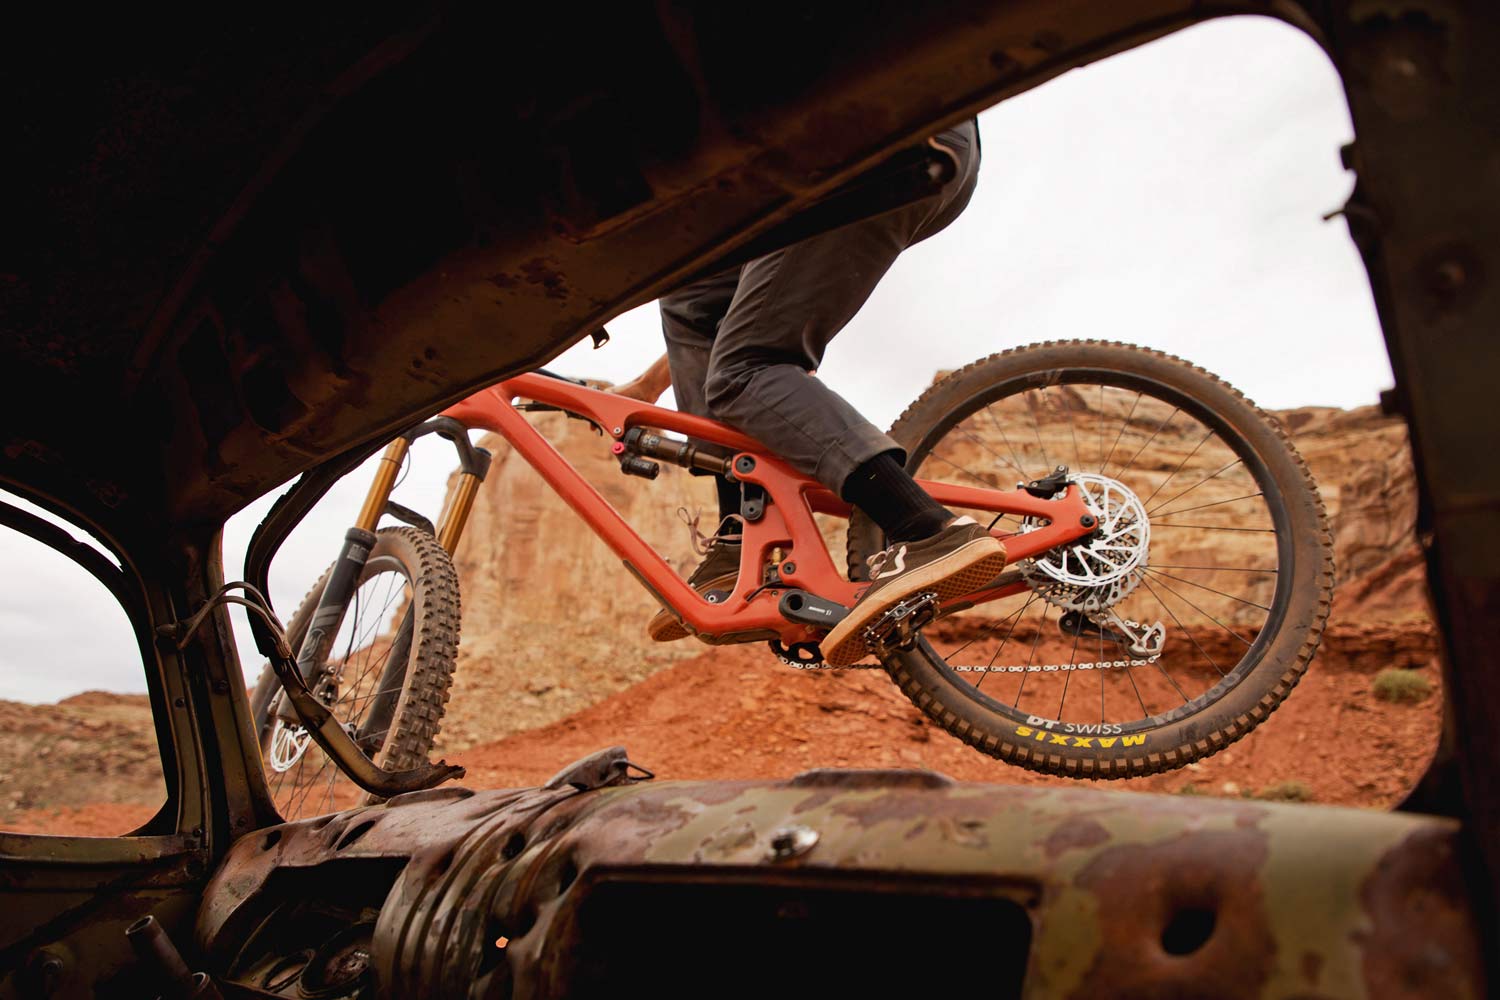 Yeti SB140 rips all over the mountain on playful new carbon trail bike